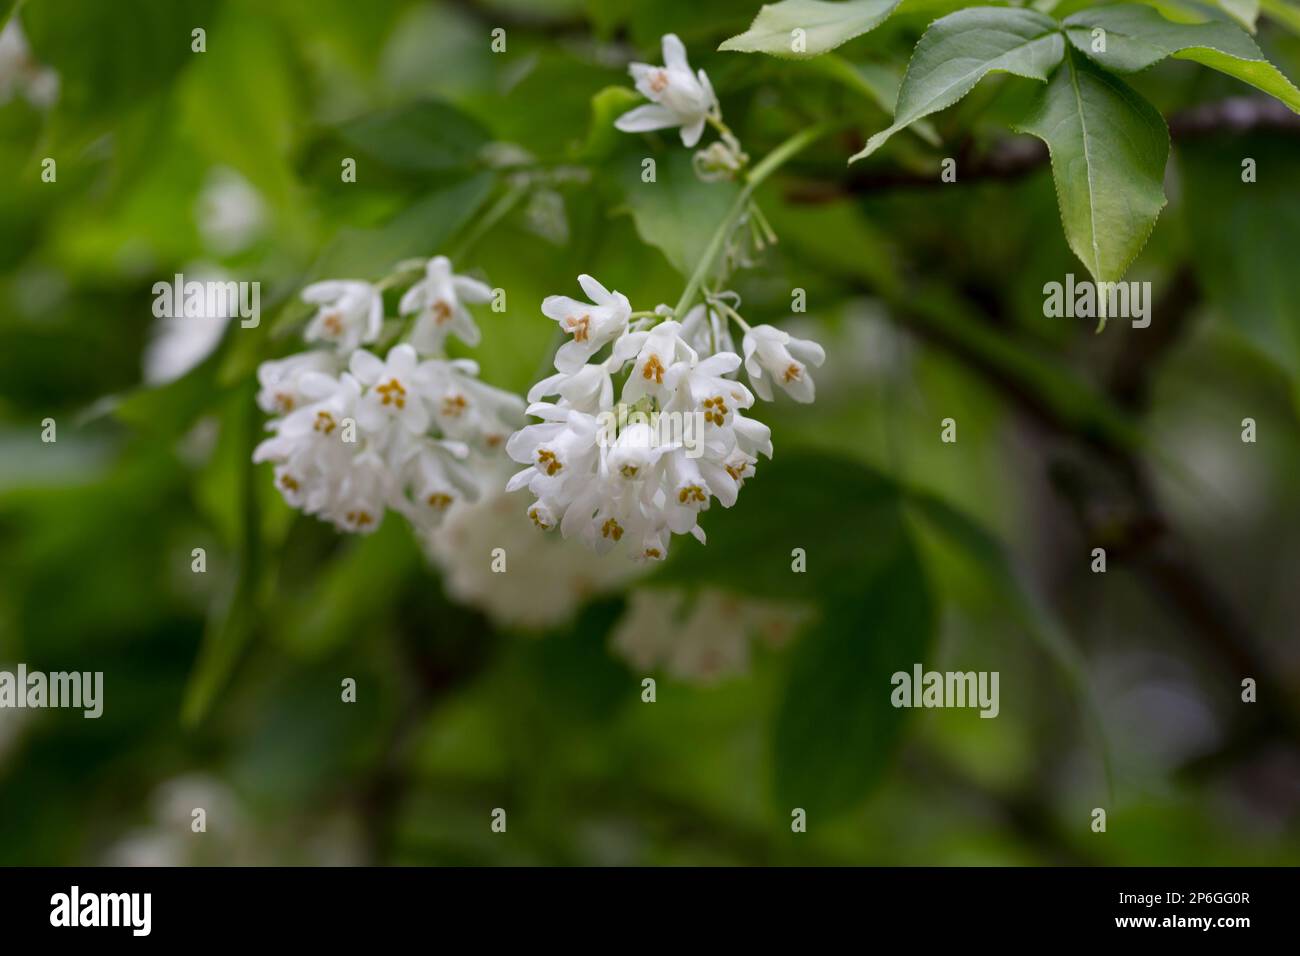 A closeup shot of bell-shaped, fragrant buds and flowers of the Staphylea Pinnata amid green leaves spring flower background Stock Photo